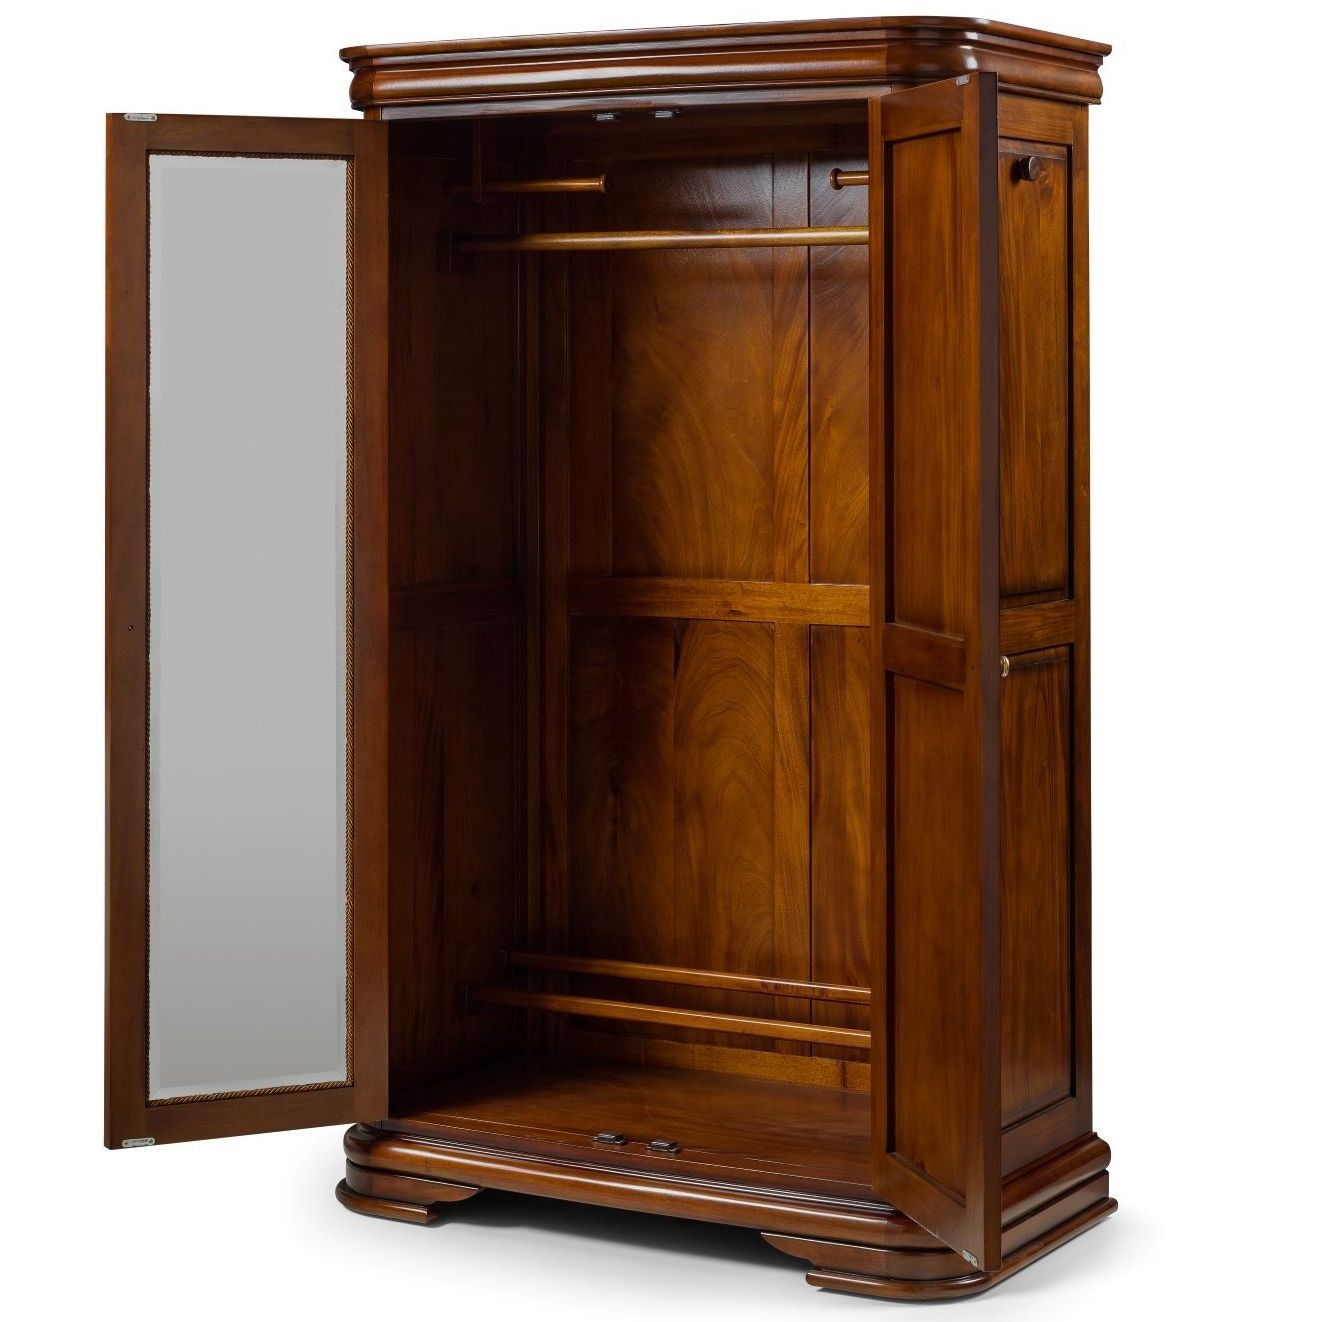 Antoinette French Sleigh Double Wardrobe | Traditional French Wardrobes |  French Bedroom Furniture | Sleigh Wardrobe Throughout Mahogany Wardrobes (View 11 of 20)